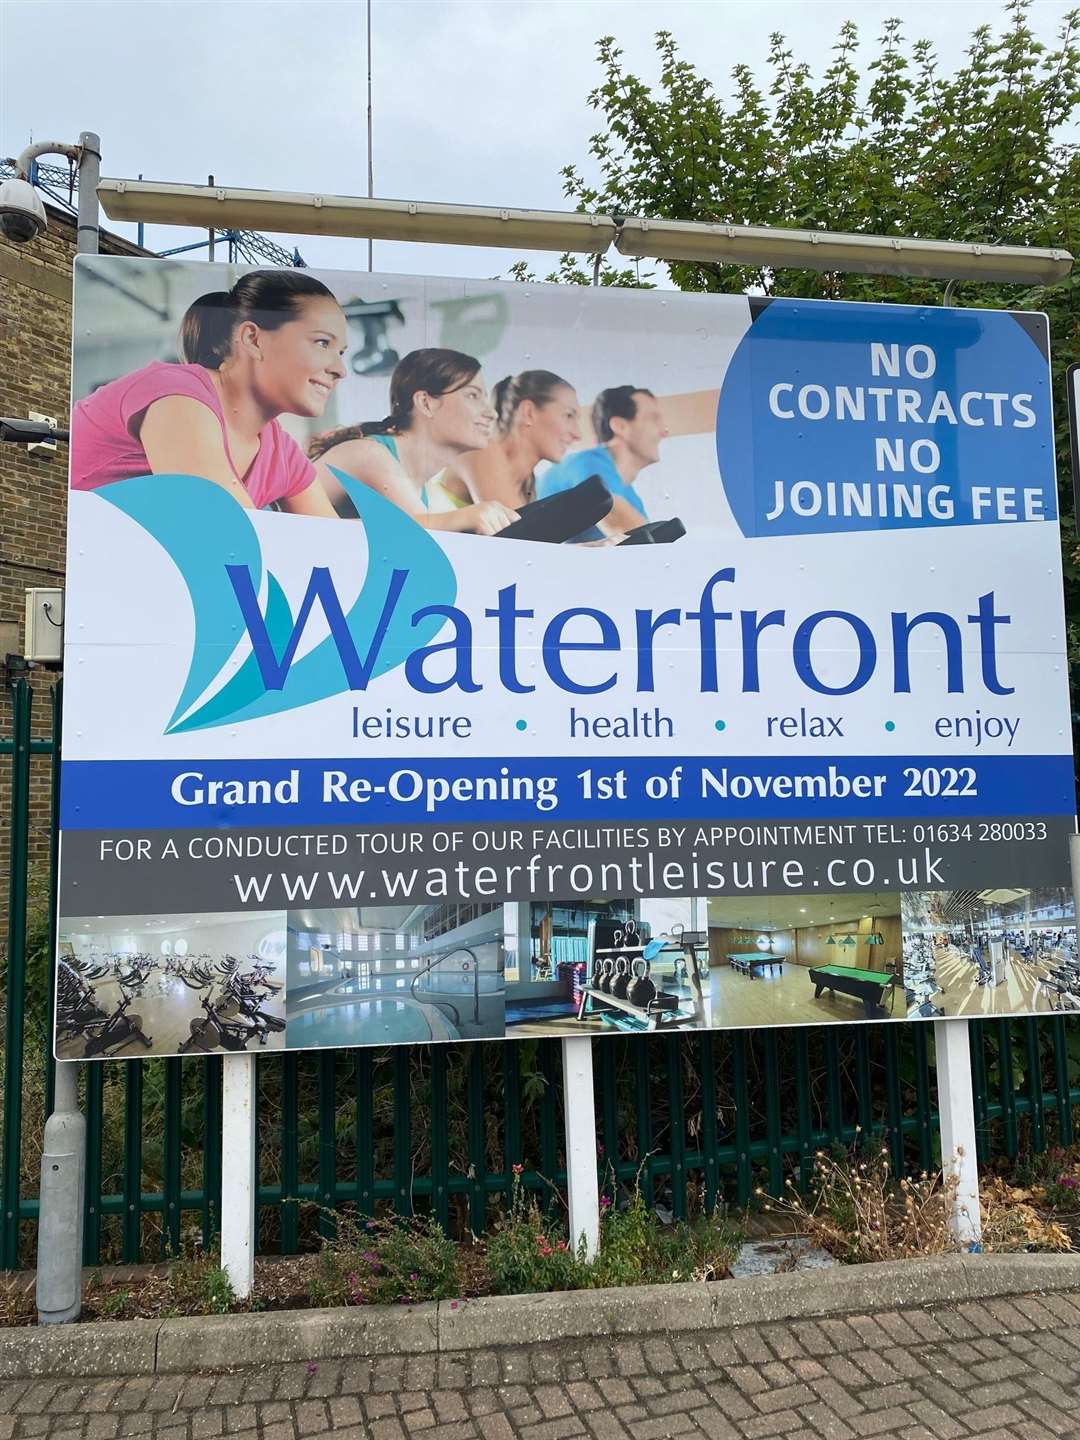 Waterfront to re-open